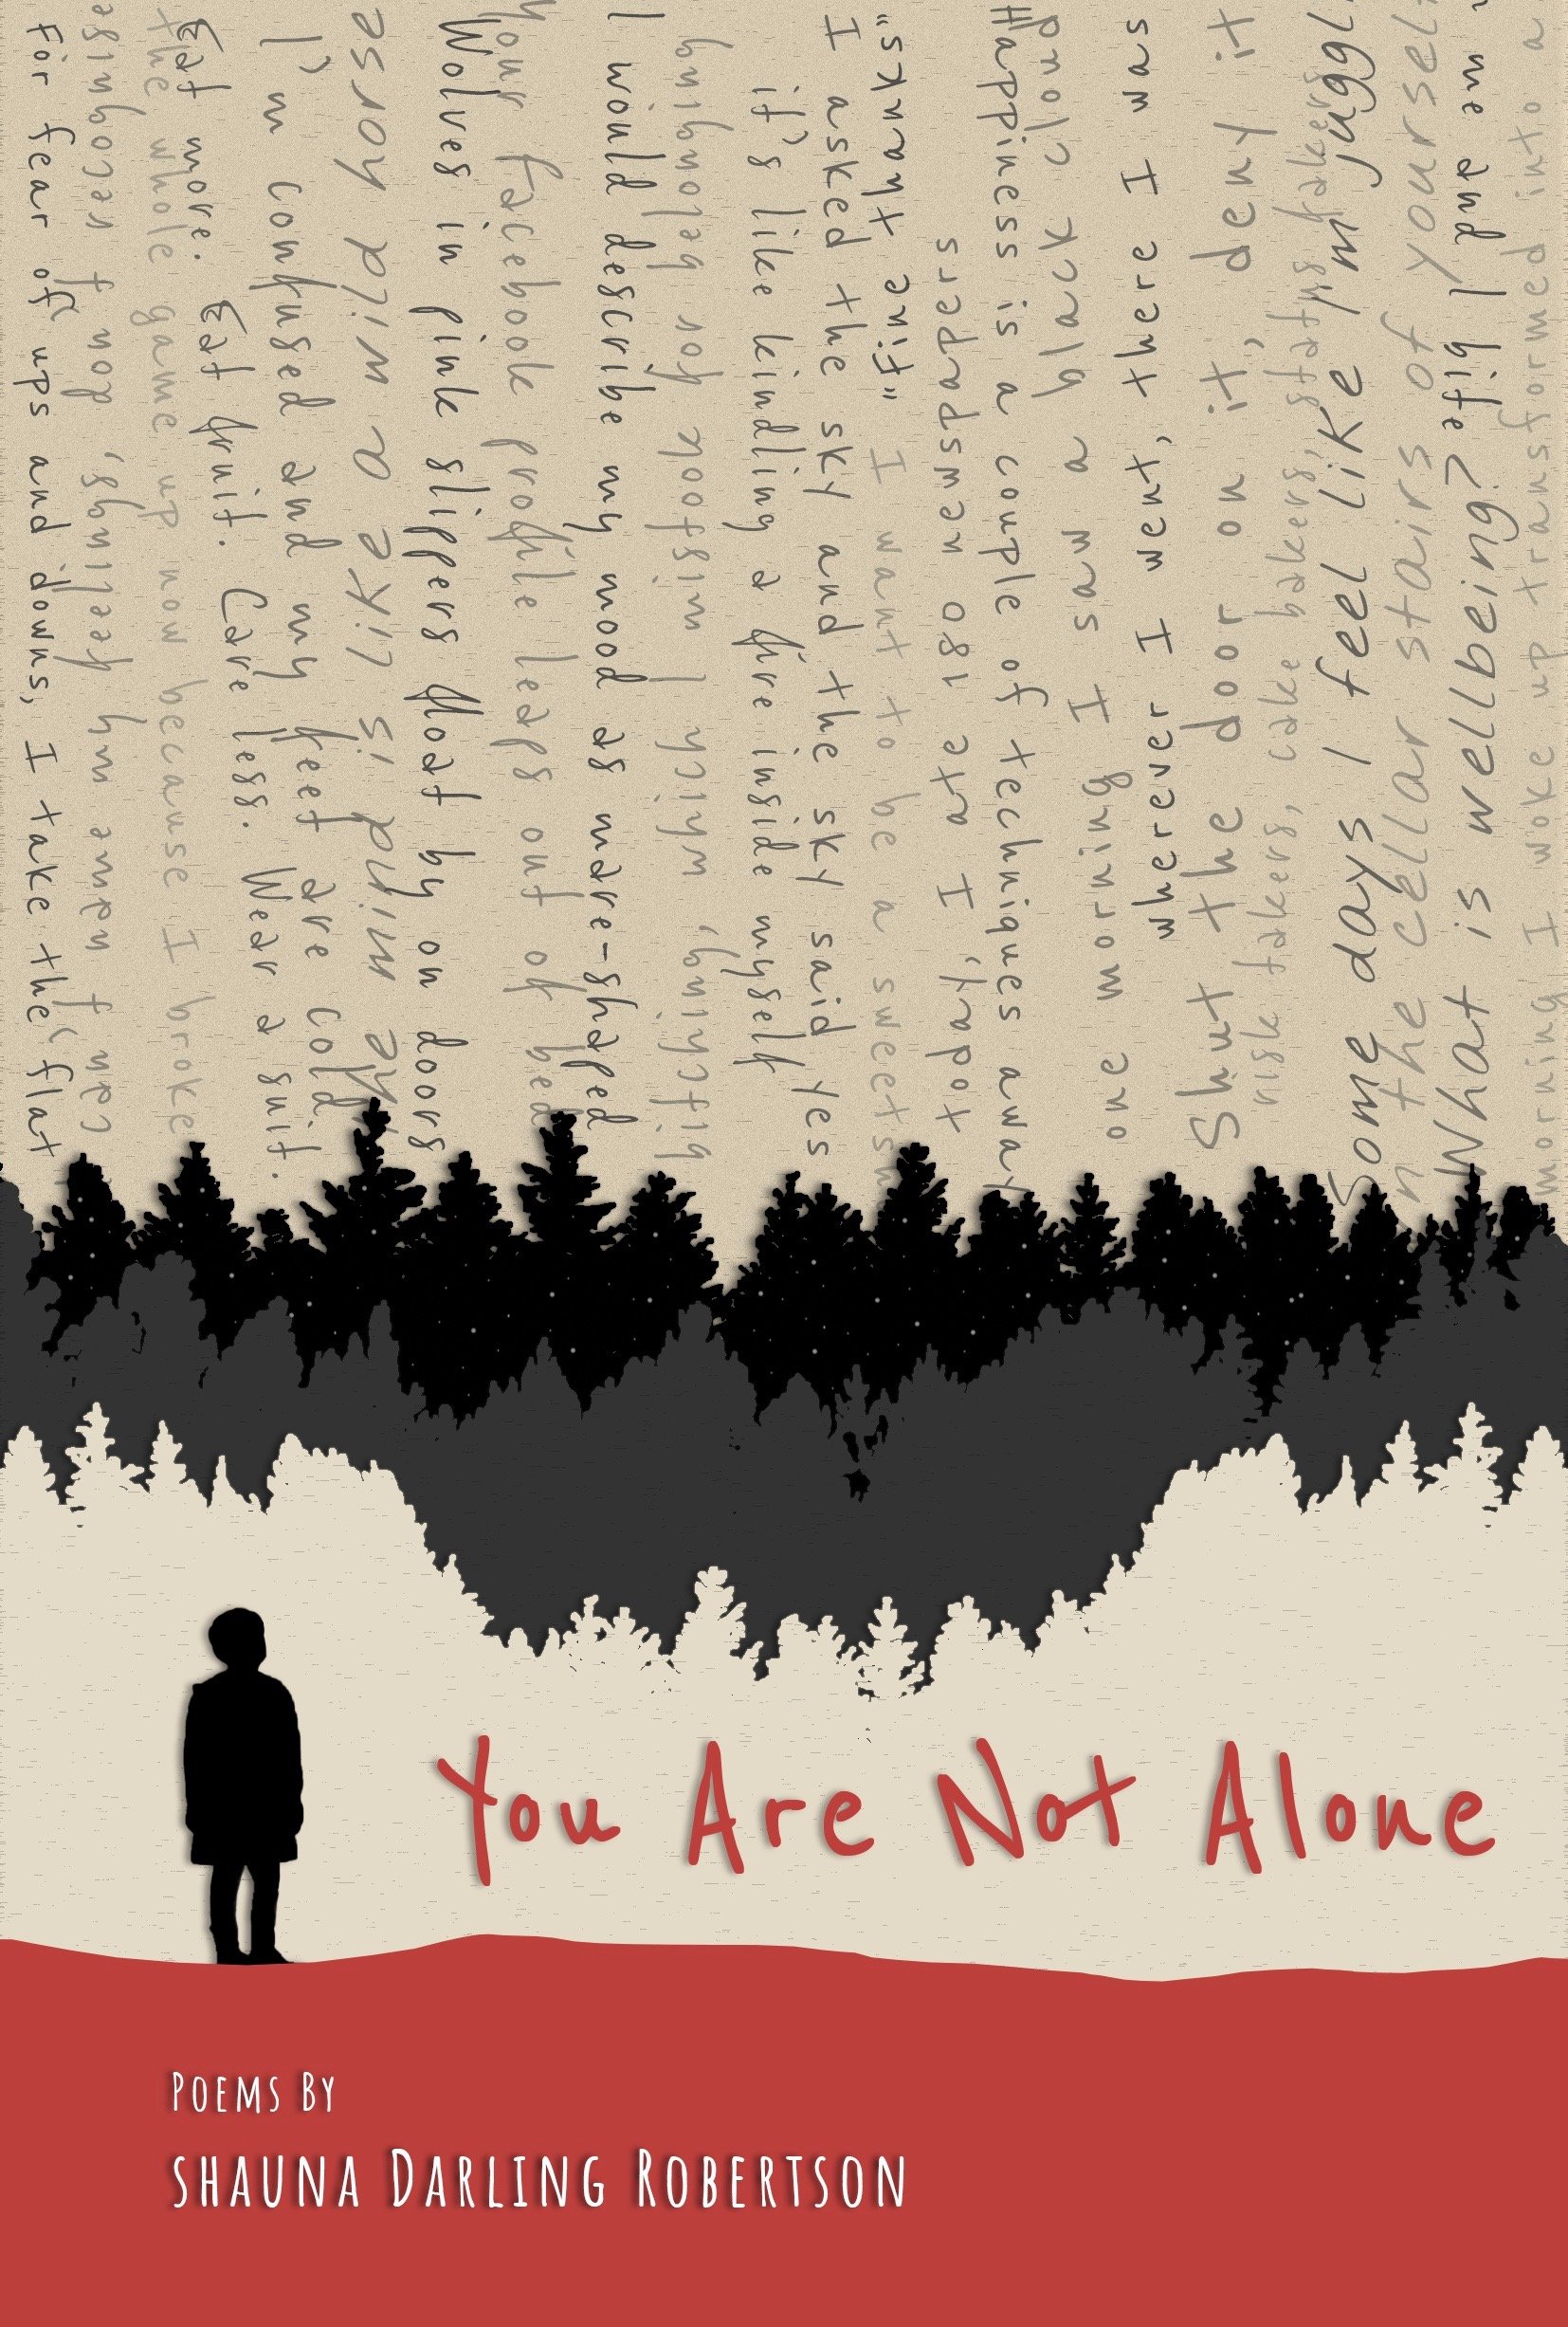 You Are Not Alone.jpg